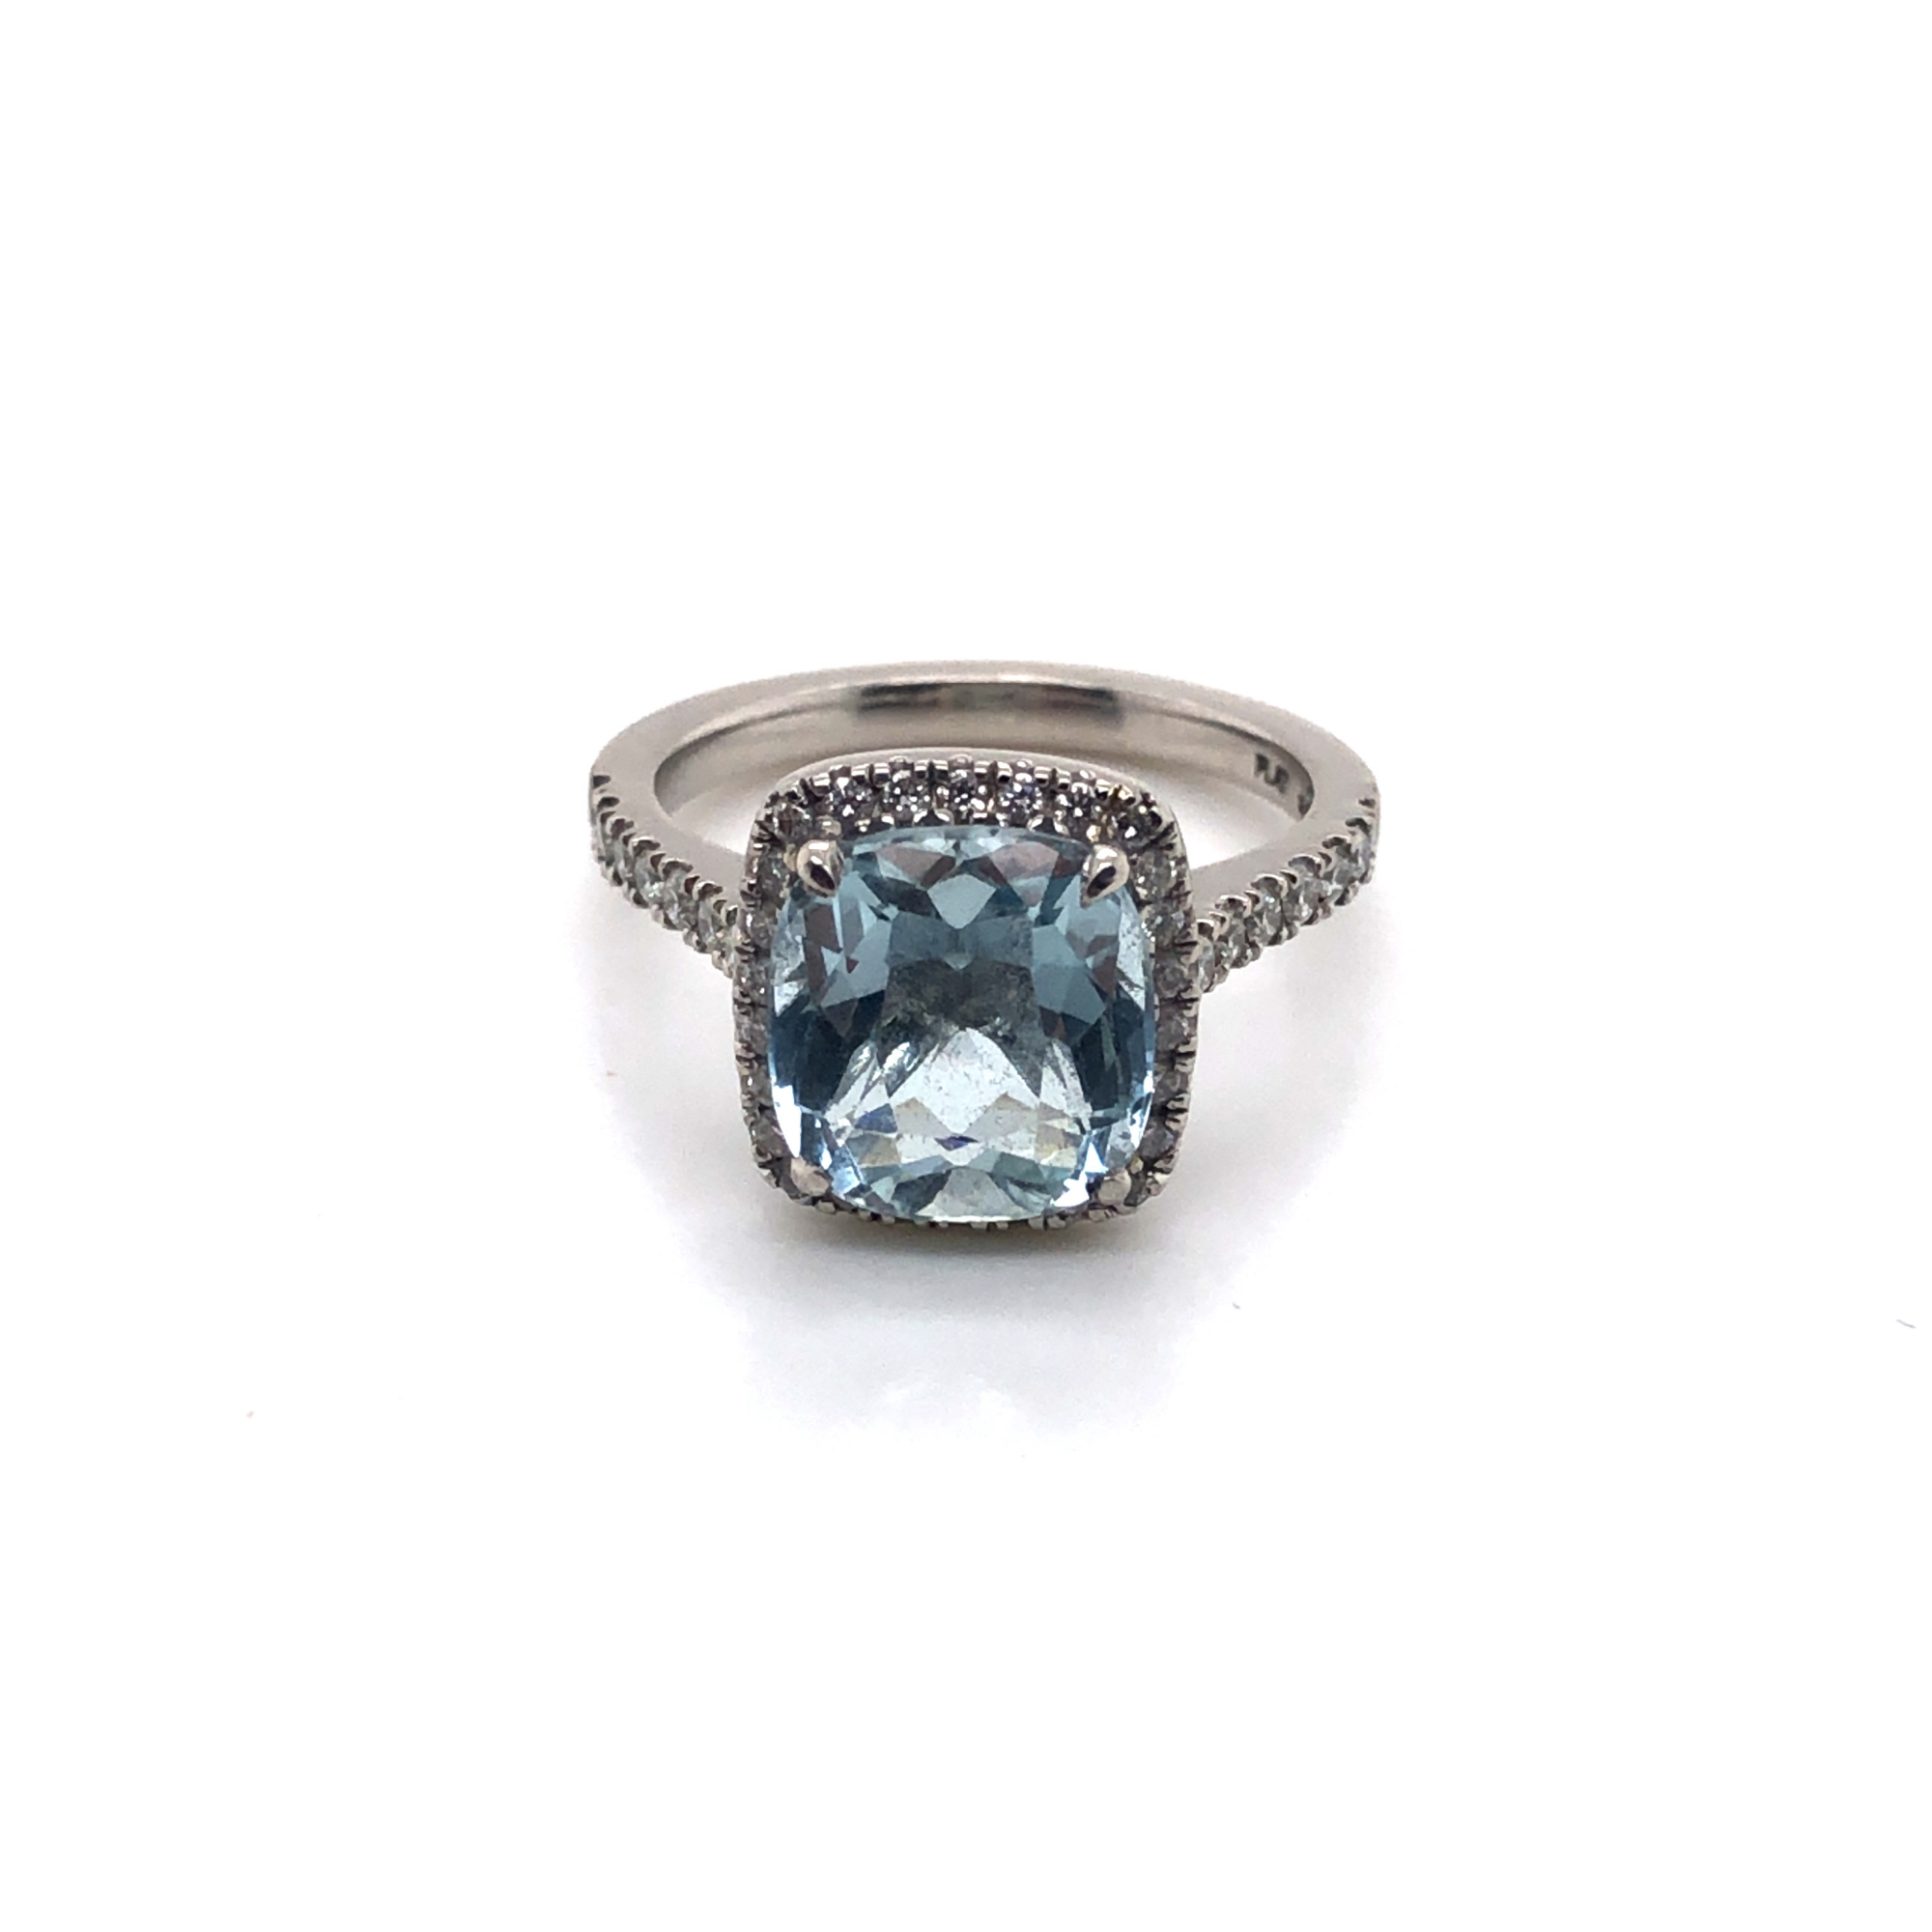 A CUSHION CUT AQUAMARINE AND DIAMOND HALO RING. THE SHANK STAMPED PLAT 950, AND ASSESSED AS - Image 7 of 7